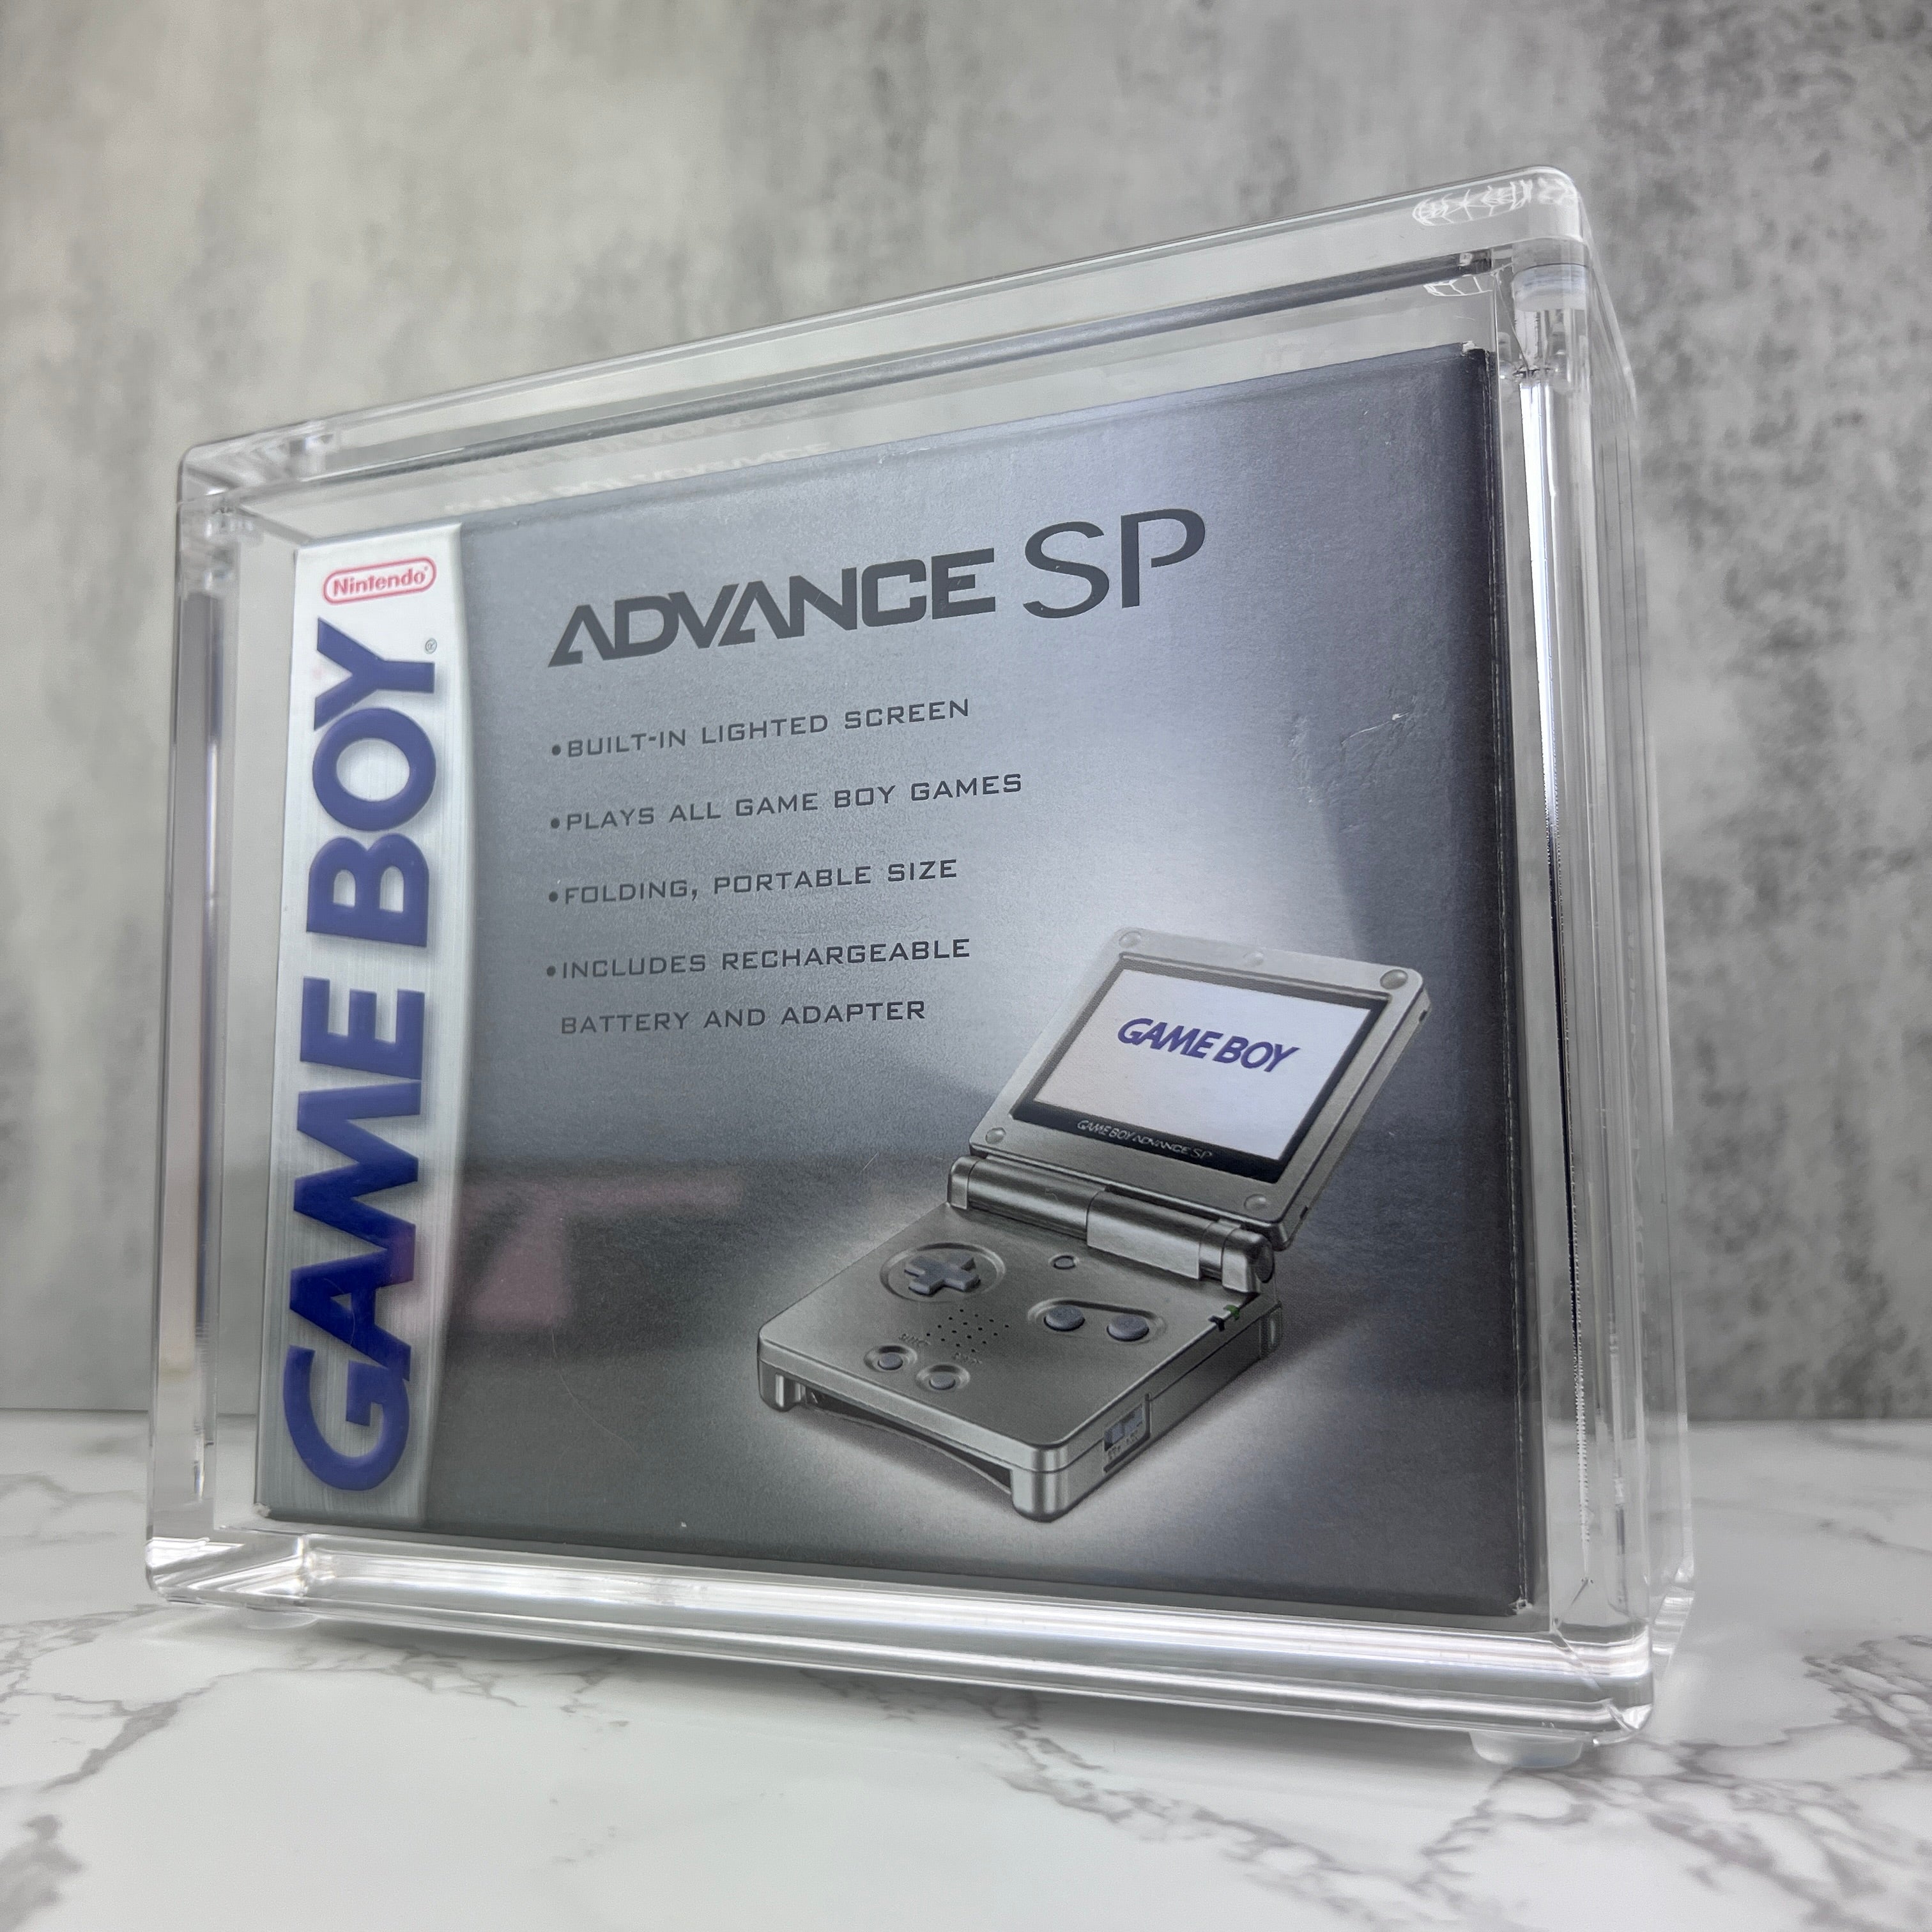 Gameboy Advance SP acrylic display cases are custom designed with strong neodymium magnets, UV resistant coating, maximum transparency and thick walls for years of heavy, trustworthy protection.